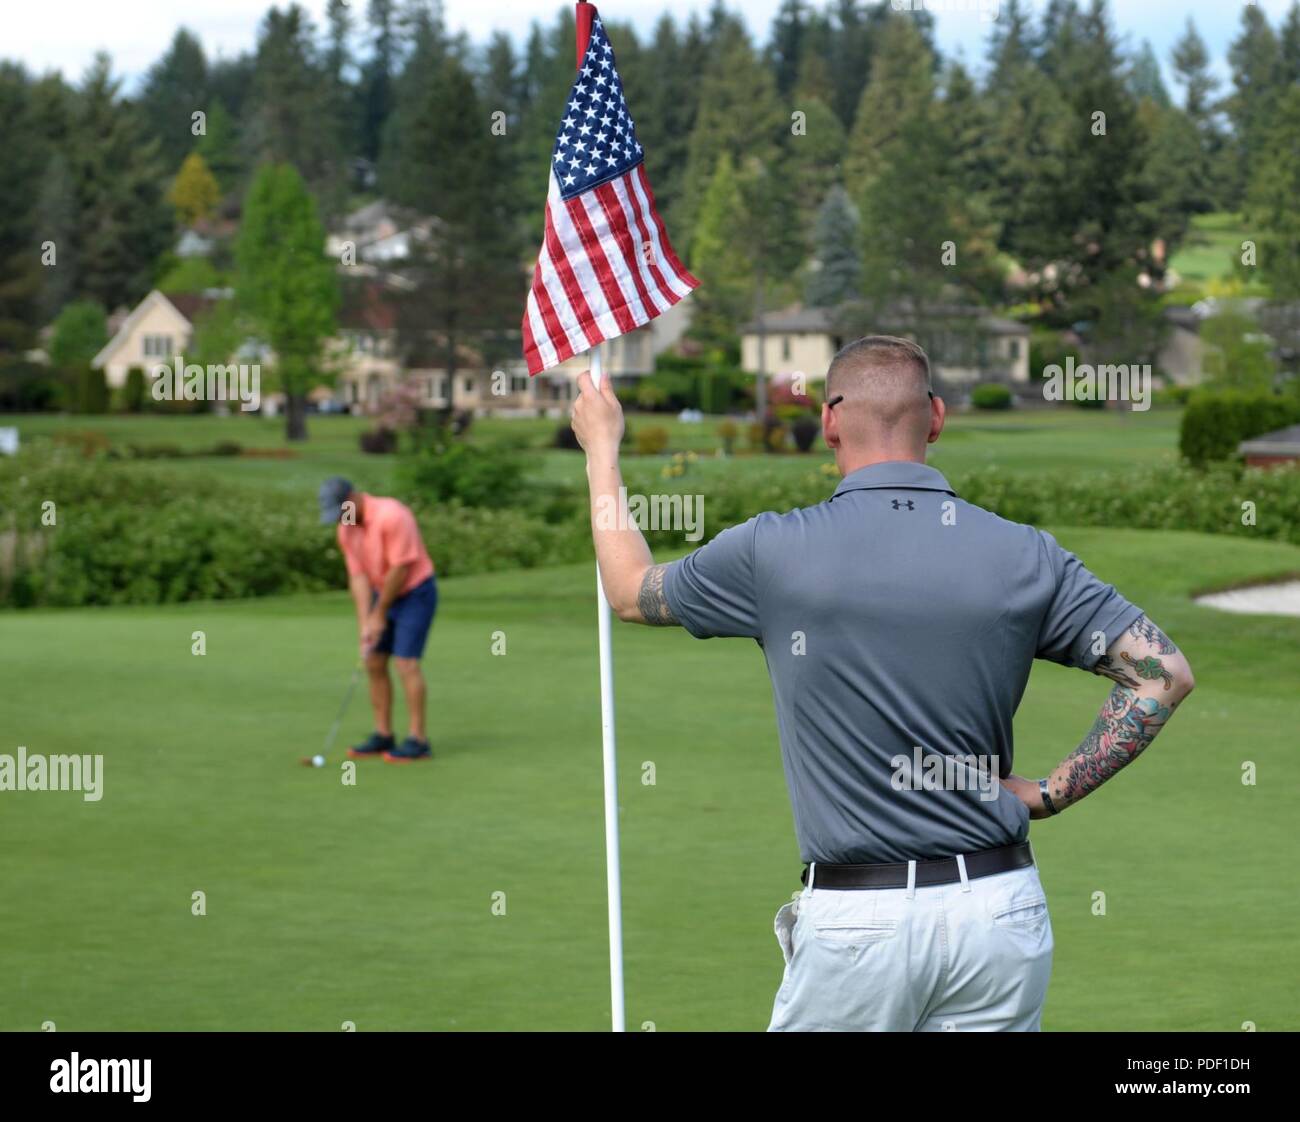 Sgt. Joseph Erlach, from the 42nd Military Police Brigade on Joint Base Lewis-McChord, tends the ninth hole flagstick during the Muckleshoot Casino Washington Open Pro-Am May 19 at the Meridian Valley Country Club in Kent, Washington. The event took place over Armed Forces Weekend. U.S. Army Stock Photo